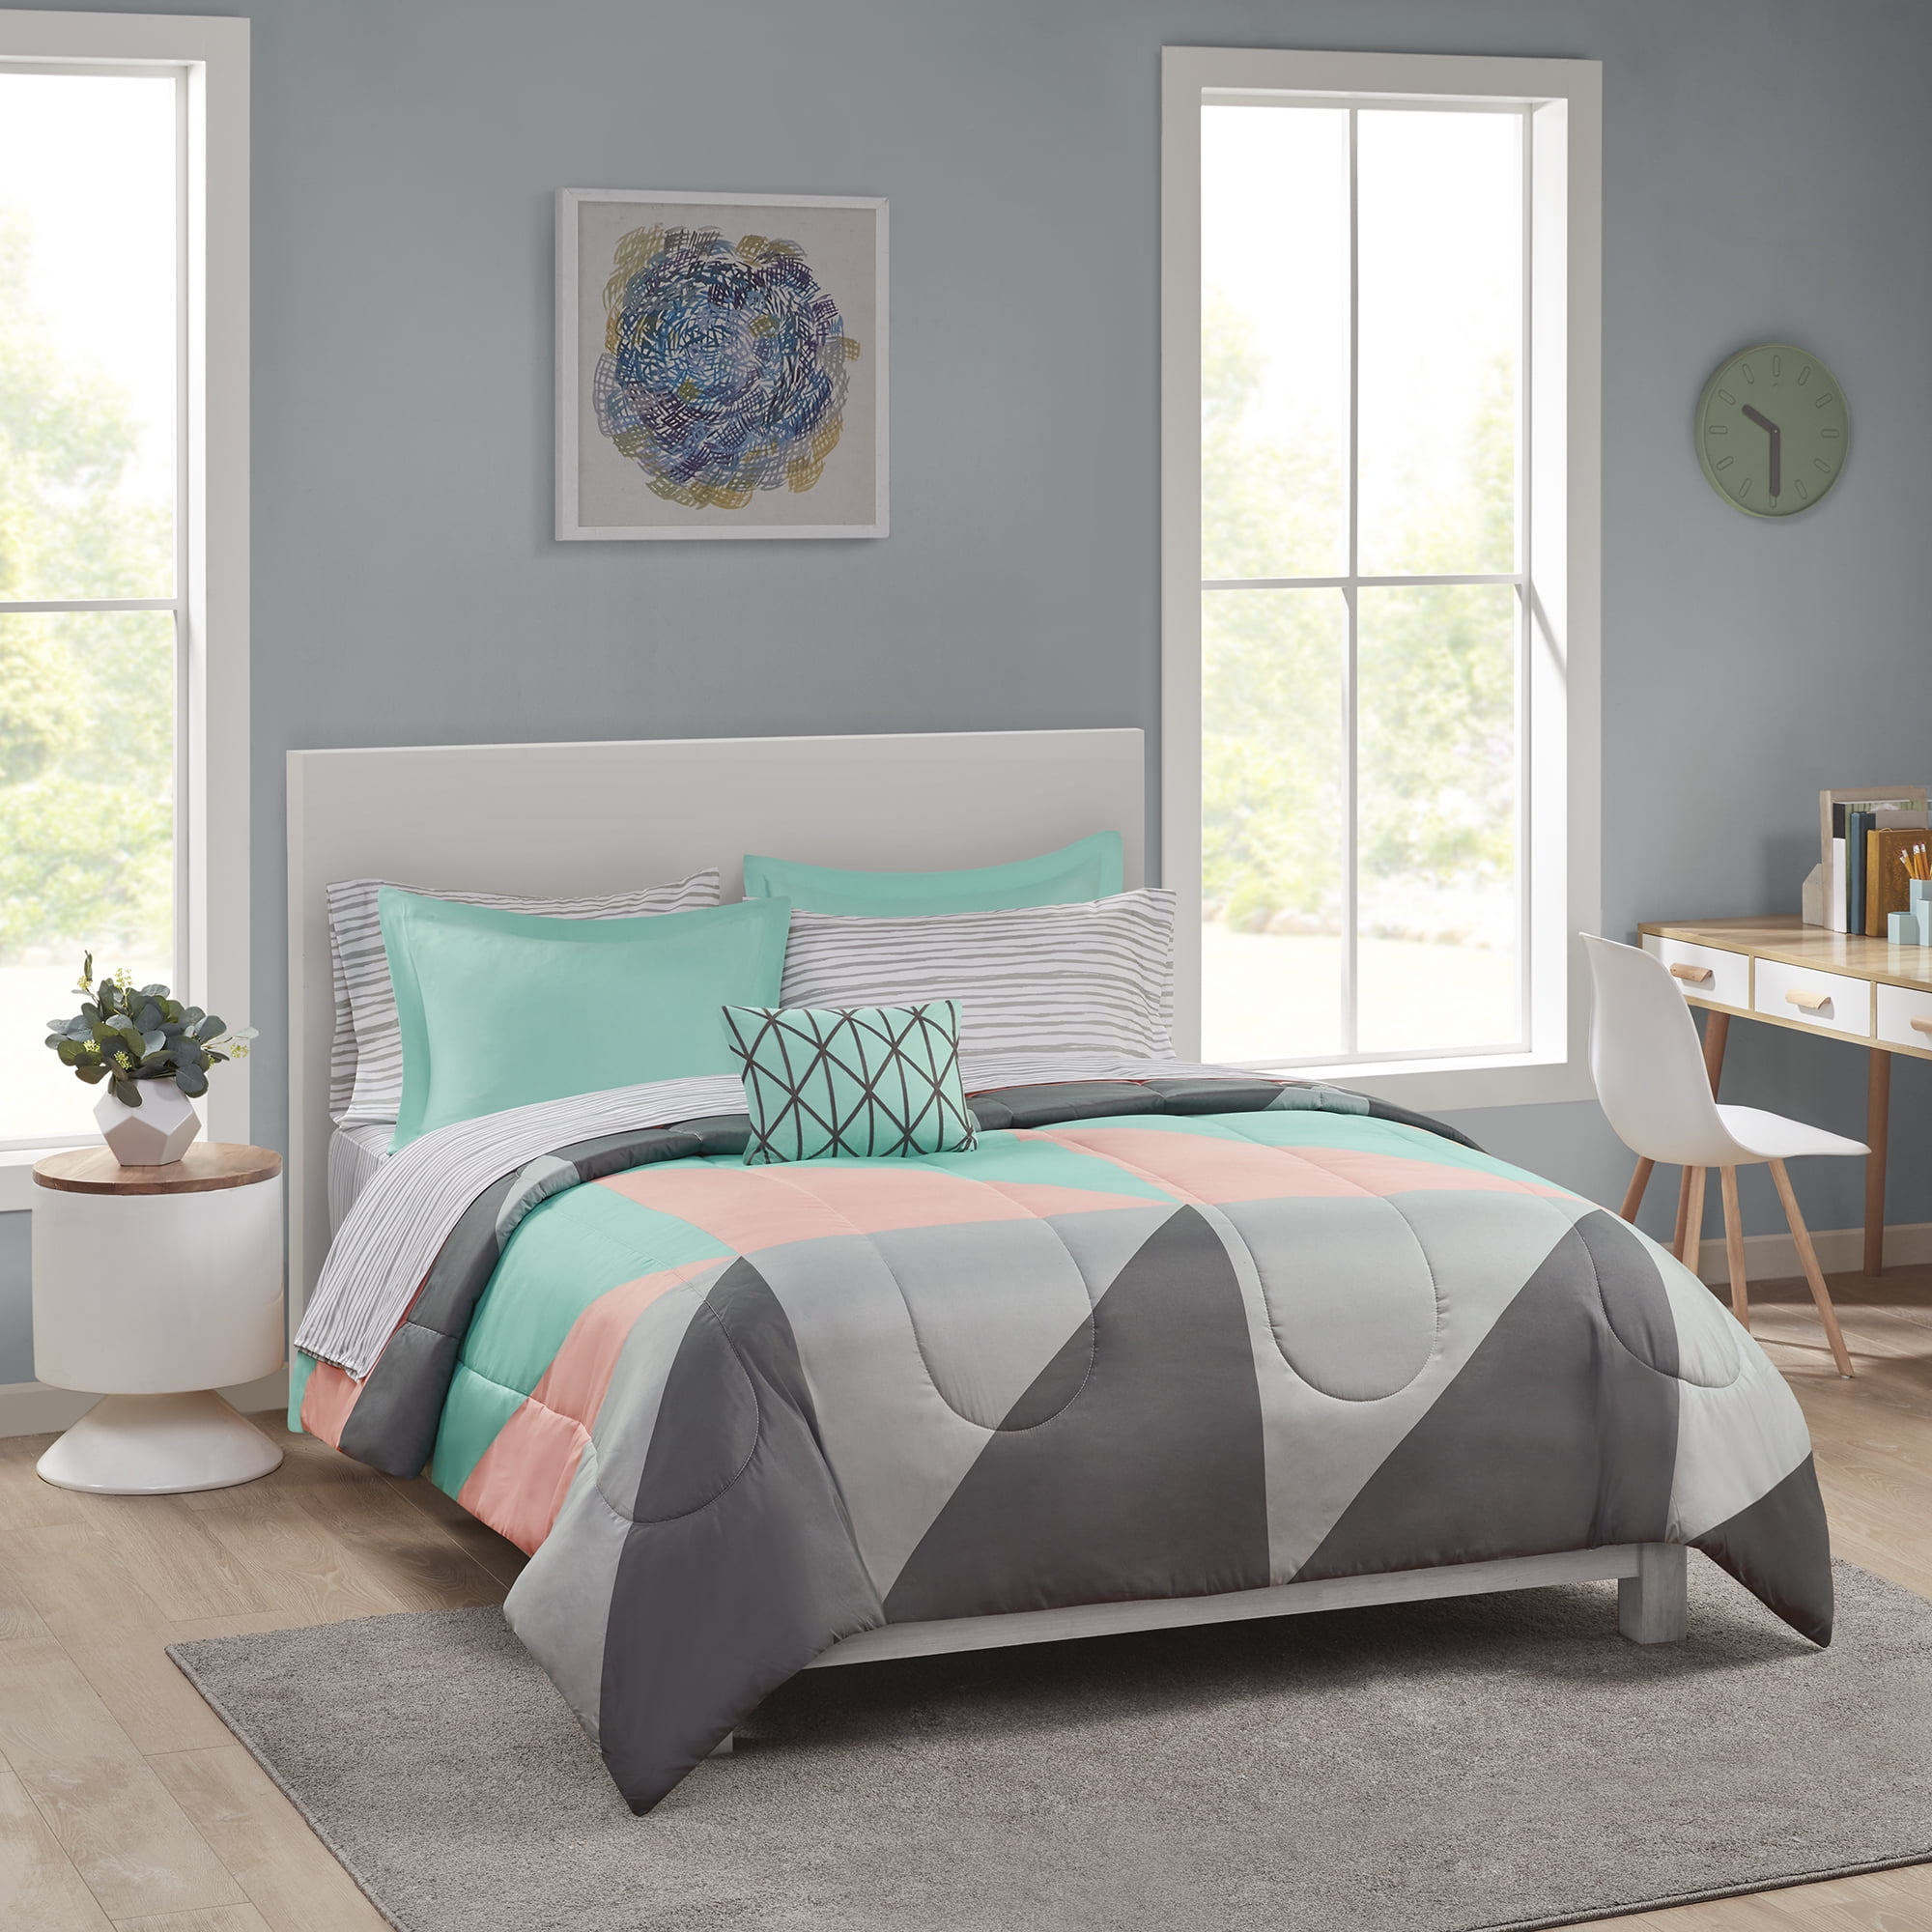 8 PCS BEDDING SET Gray and Teal Bed in a Bag FULL Size Comforter Sheets Cases 